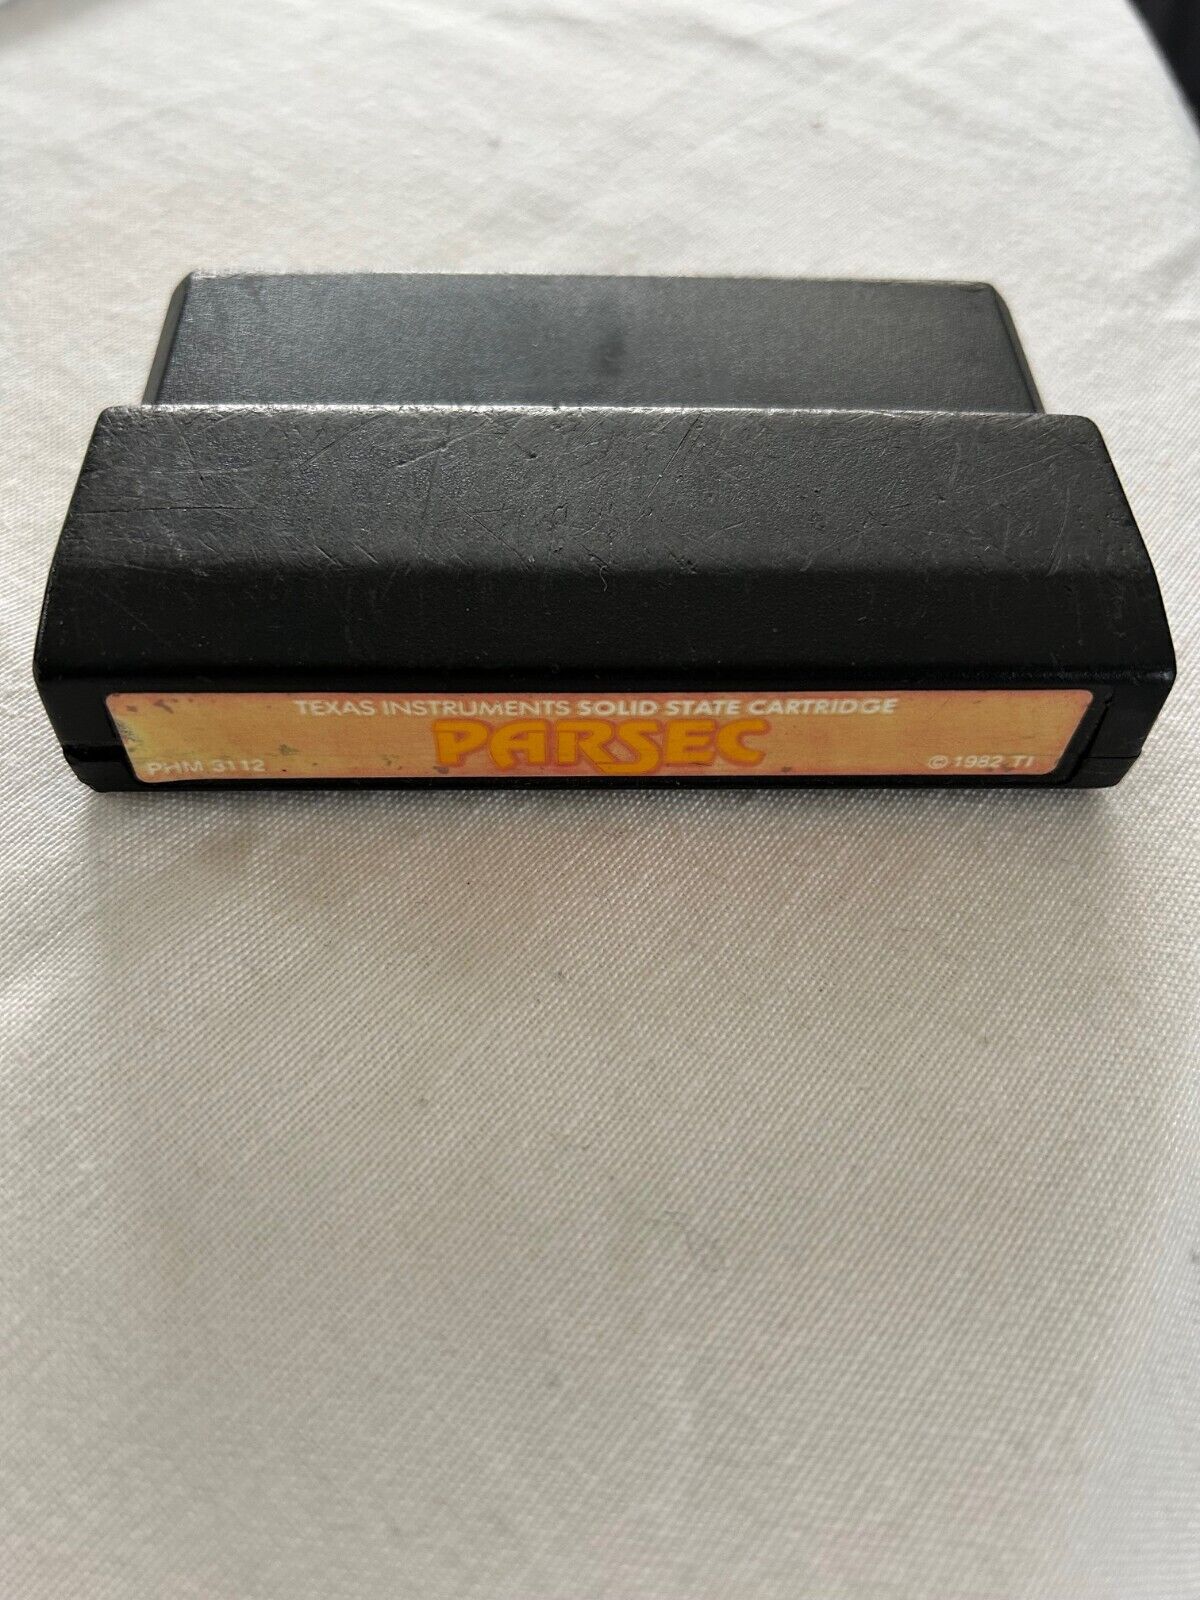 Parsec Game Cartridge for Texas Instruments Computer TI-99/4A 1982 PHM 3112